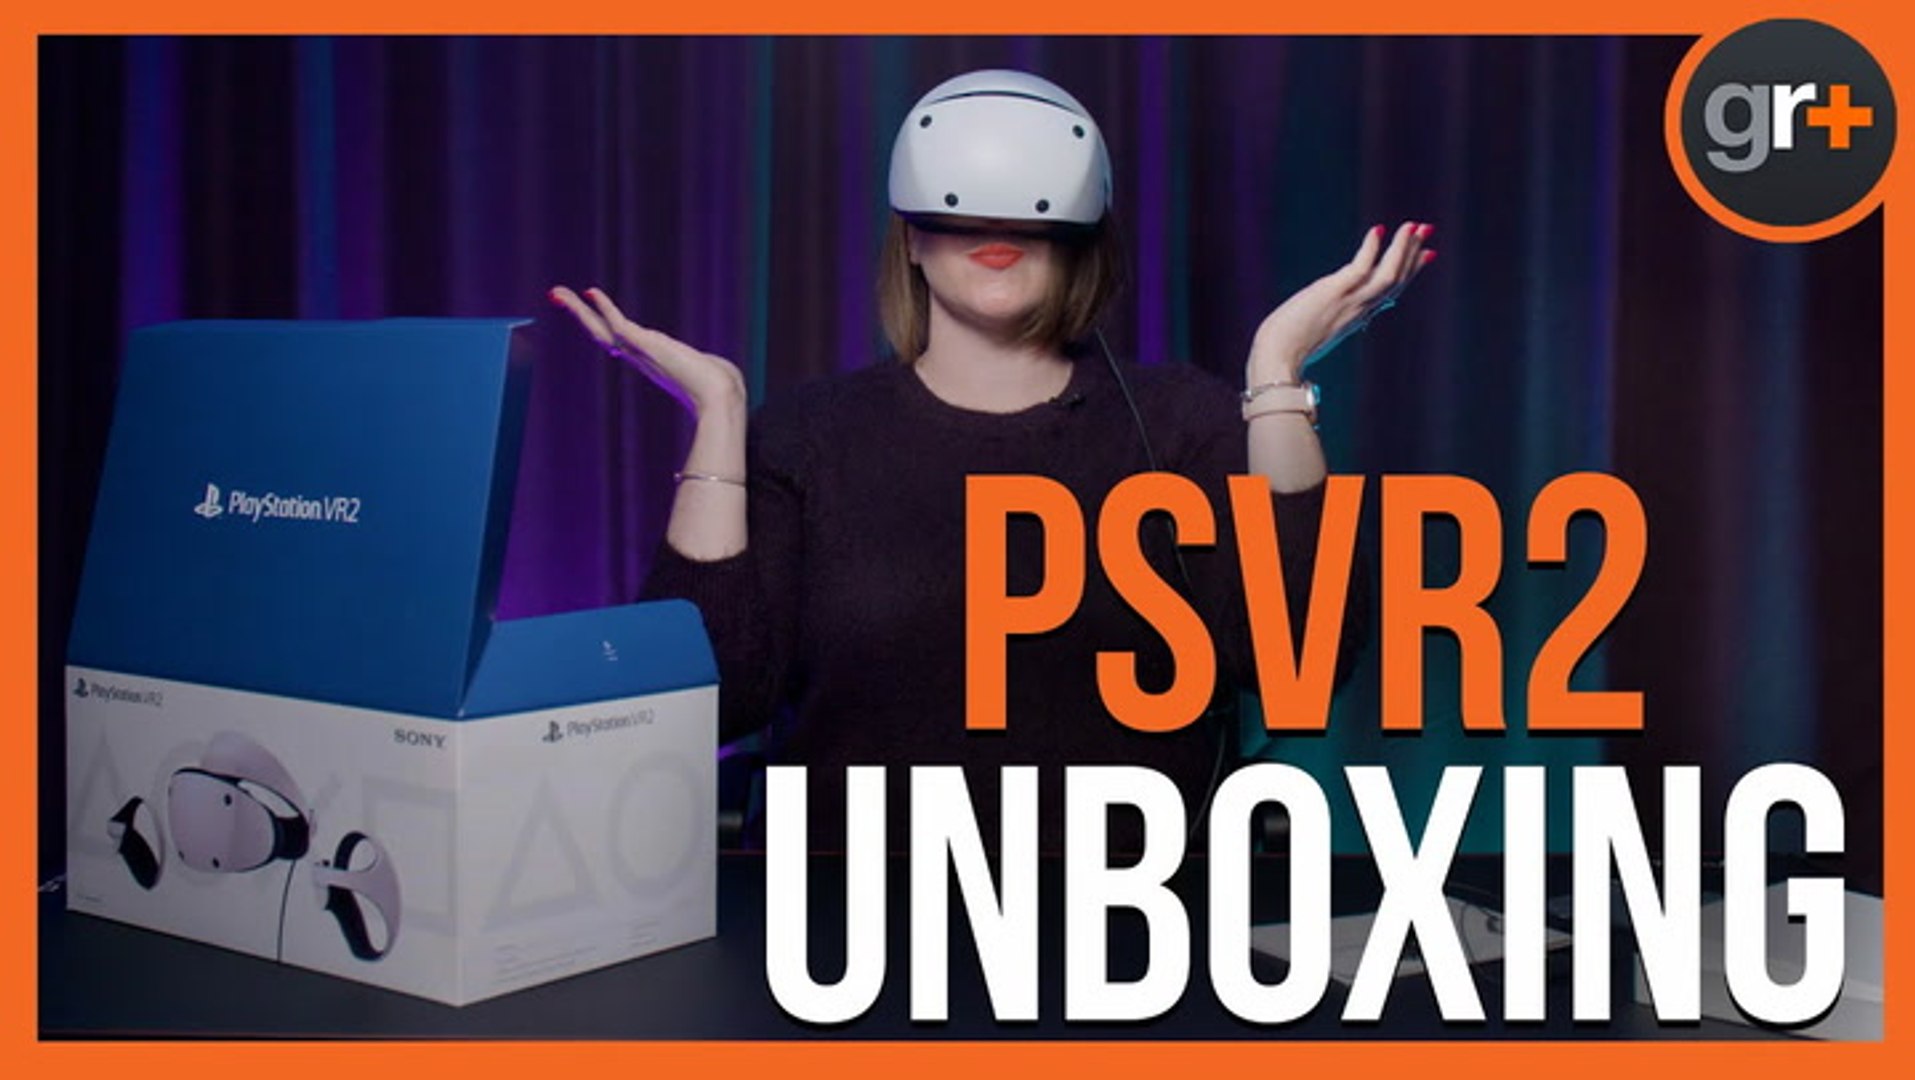 The PlayStation VR2 Unboxing - PSVR 2 Review (PS5 Virtual Reality) 